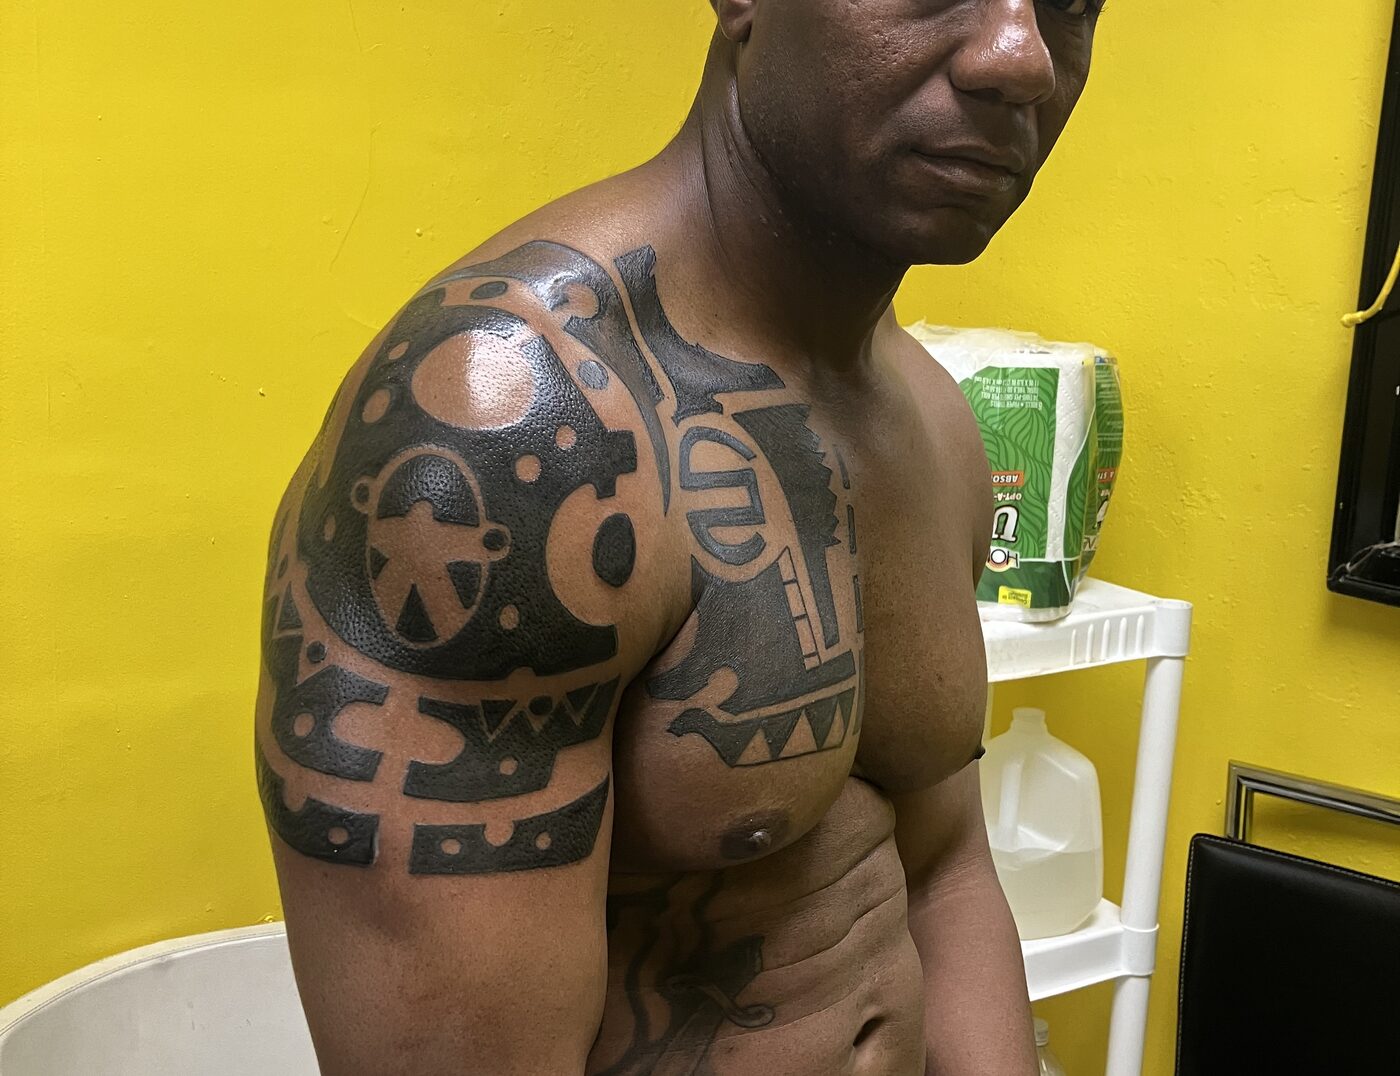 Tribal Tattoo By Binky Warbucks at Iron Palm Tattoos. African warrior tattoos symbolize bravery, fearlessness, resilience, and strength. For expatriate Nigerians in modern times they' also represent a sense of connection to ancestry. Iron Palm Tattoos is a multi-style tattoo shop in Atlanta, GA